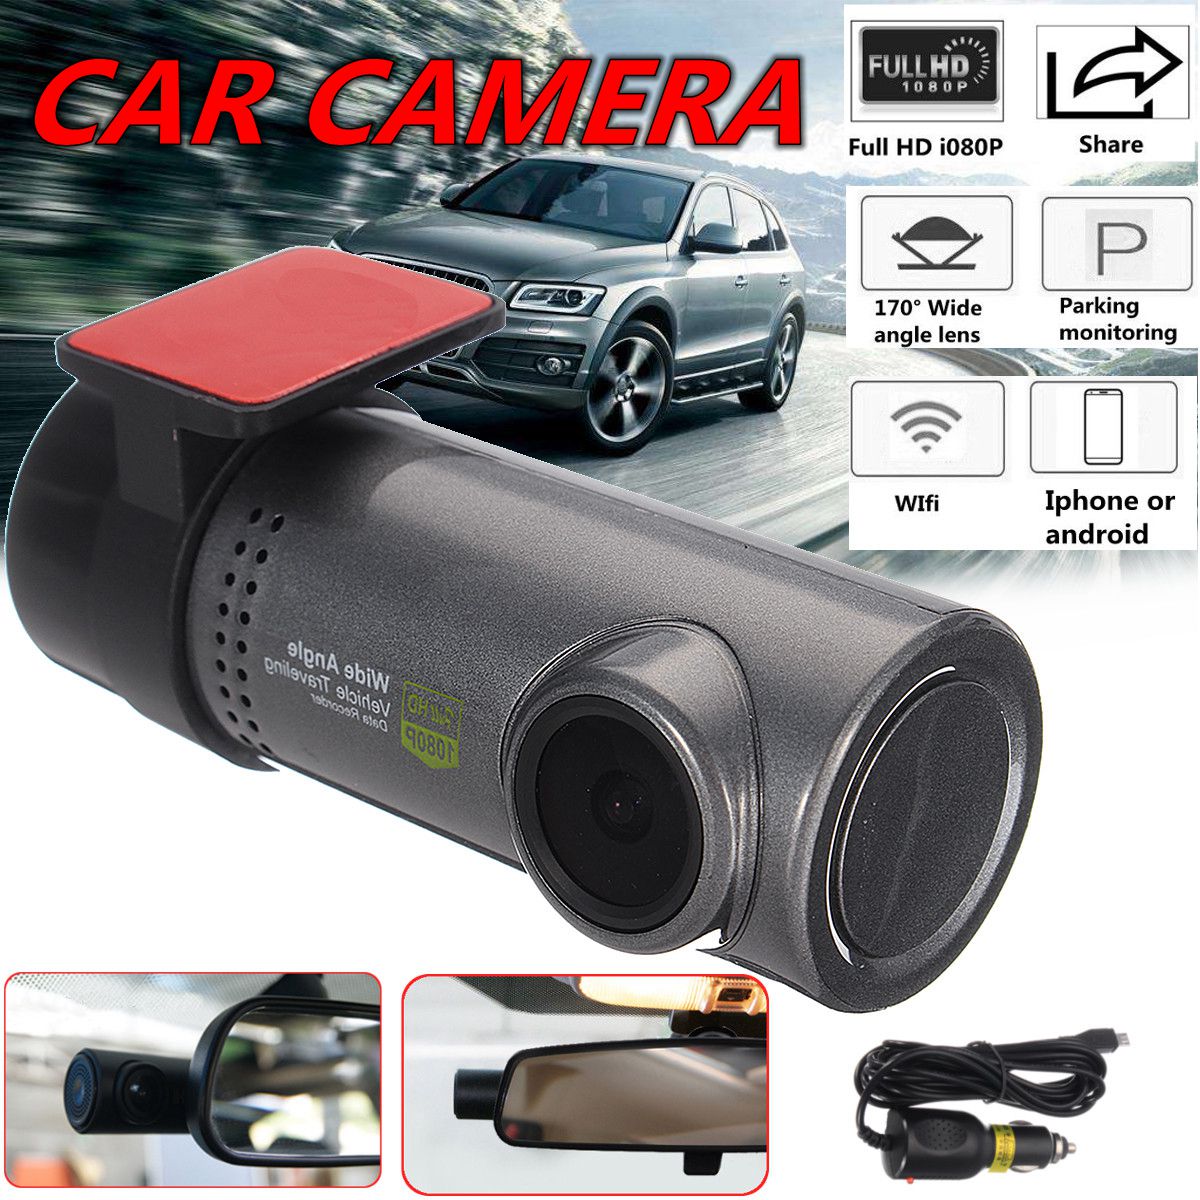 1080P-FHD-WiFi-Hidden-Sport-Camera-Buit-in-Microphone-Automatic-Cycle-Video-Recording-1348301